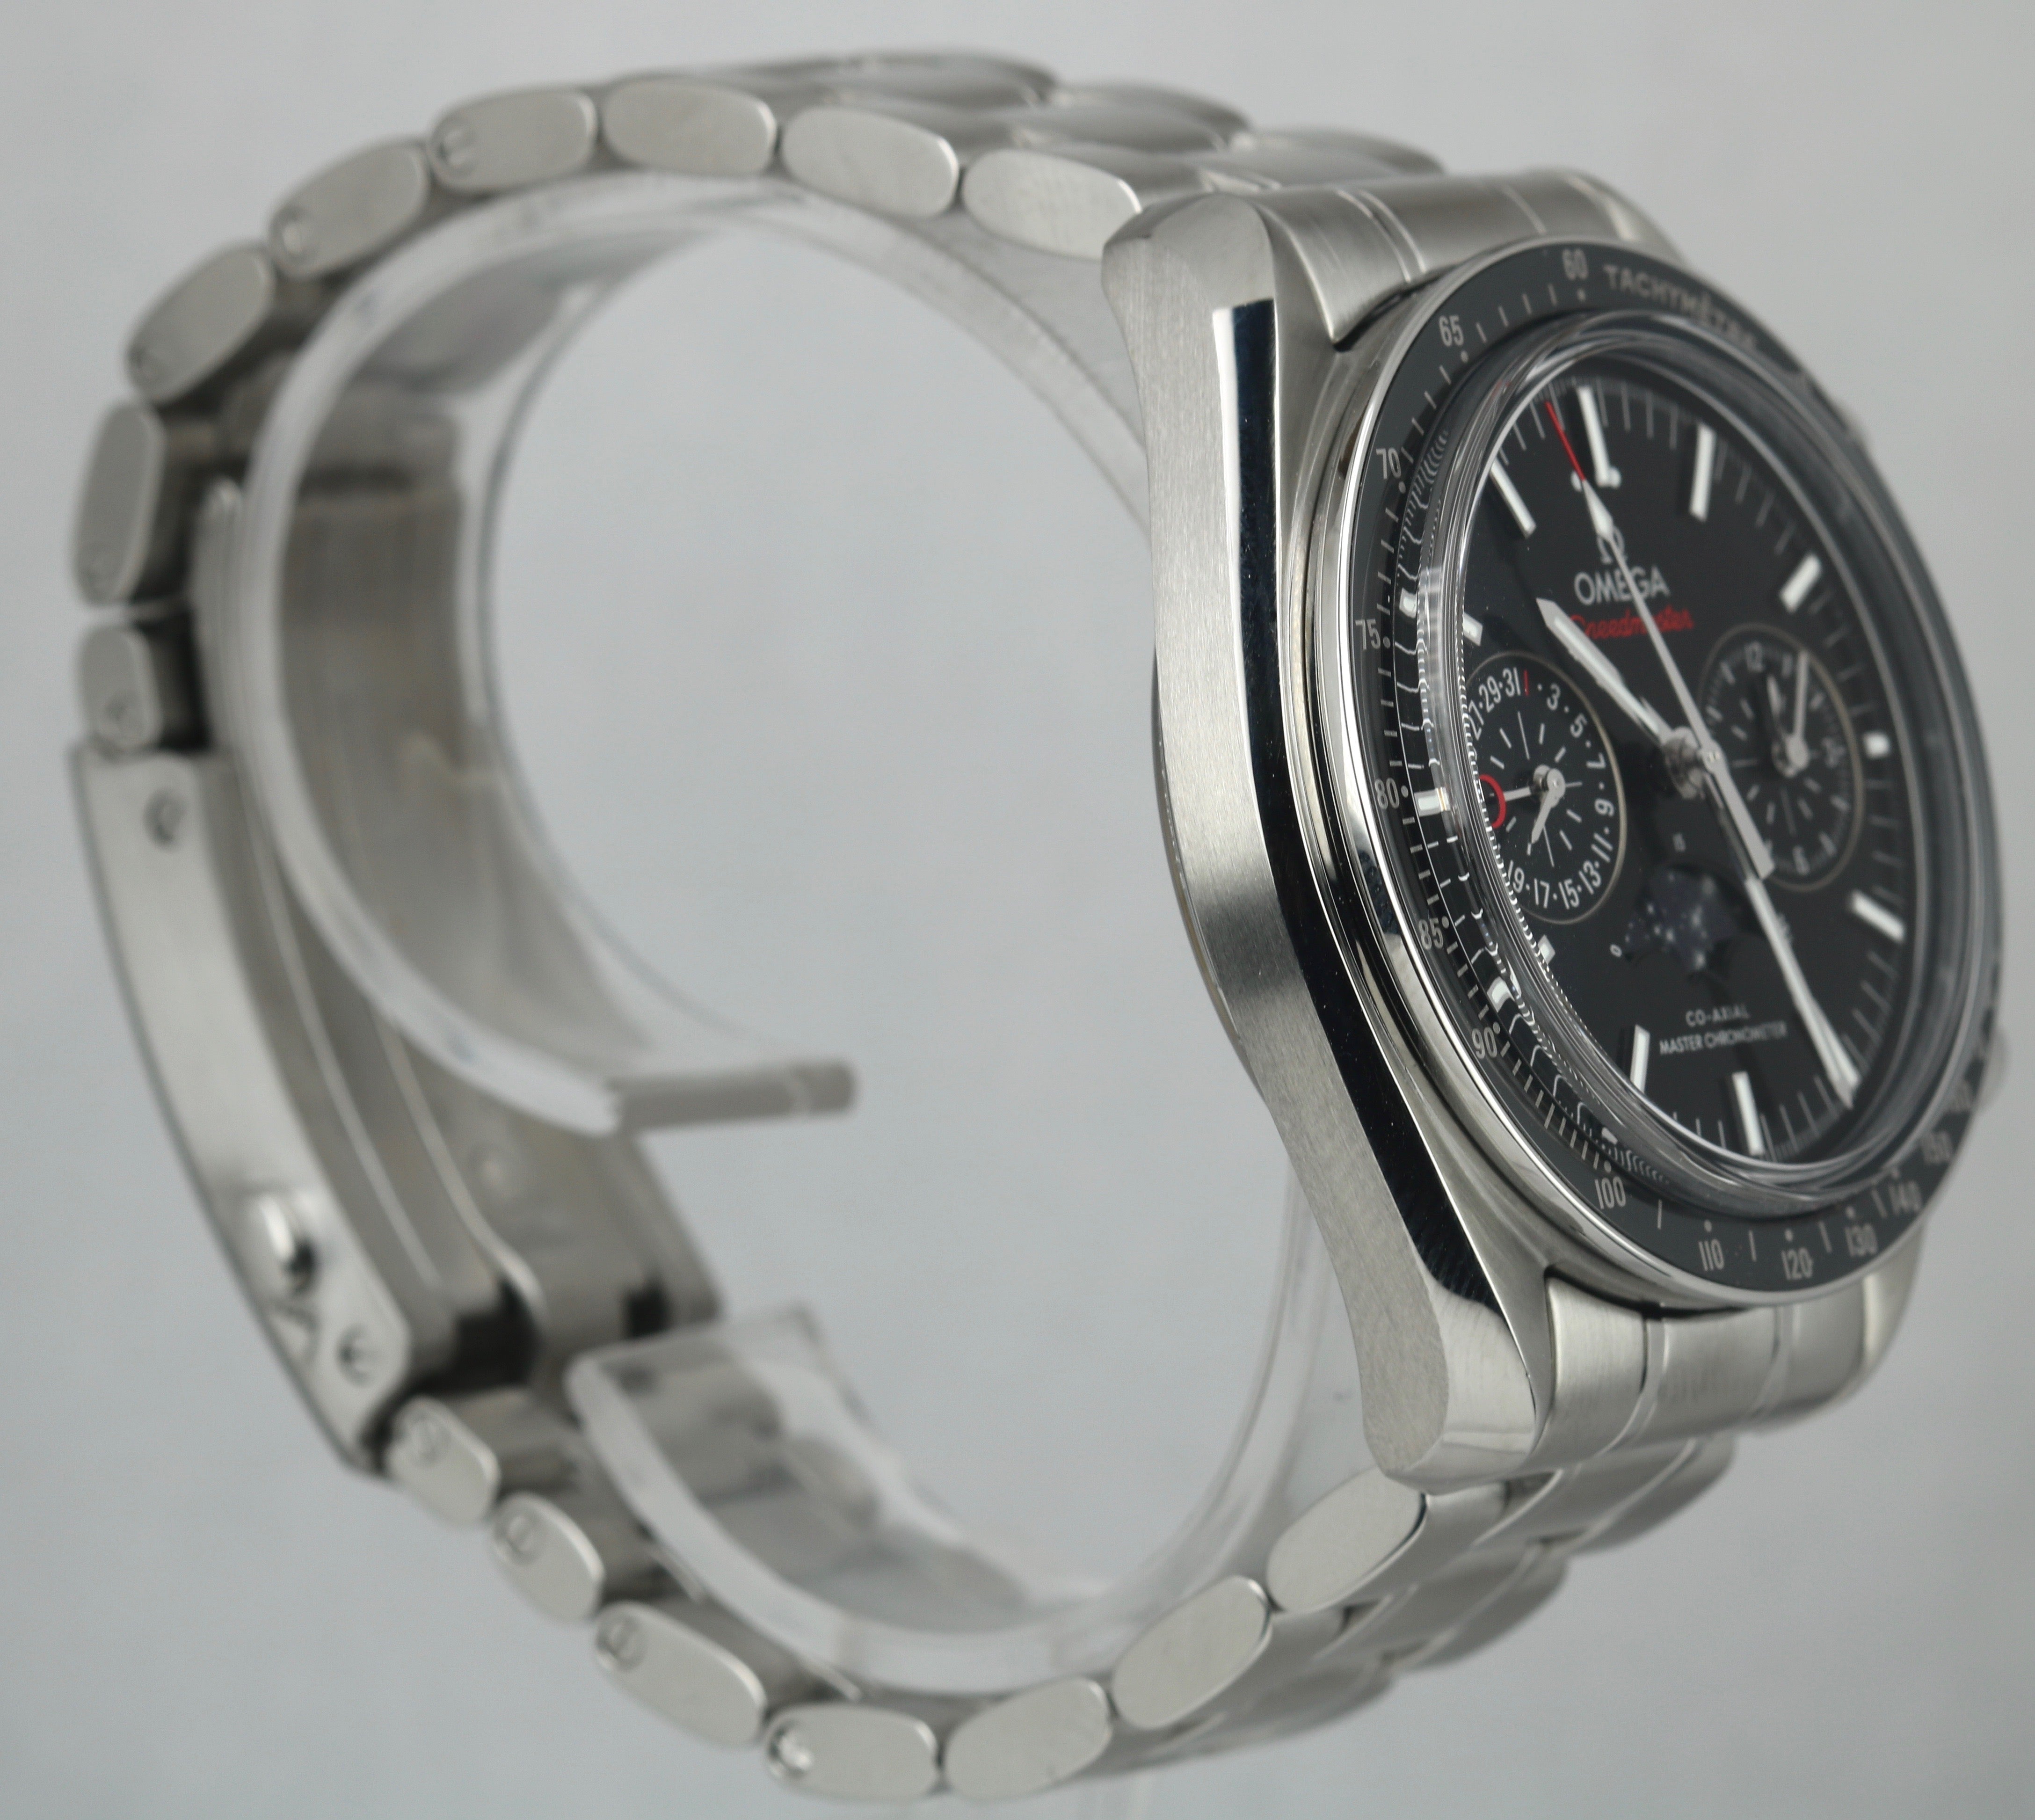 Omega Speedmaster Moonwatch 304.30.44.52.01.001 Stainless 44mm Automatic Watch